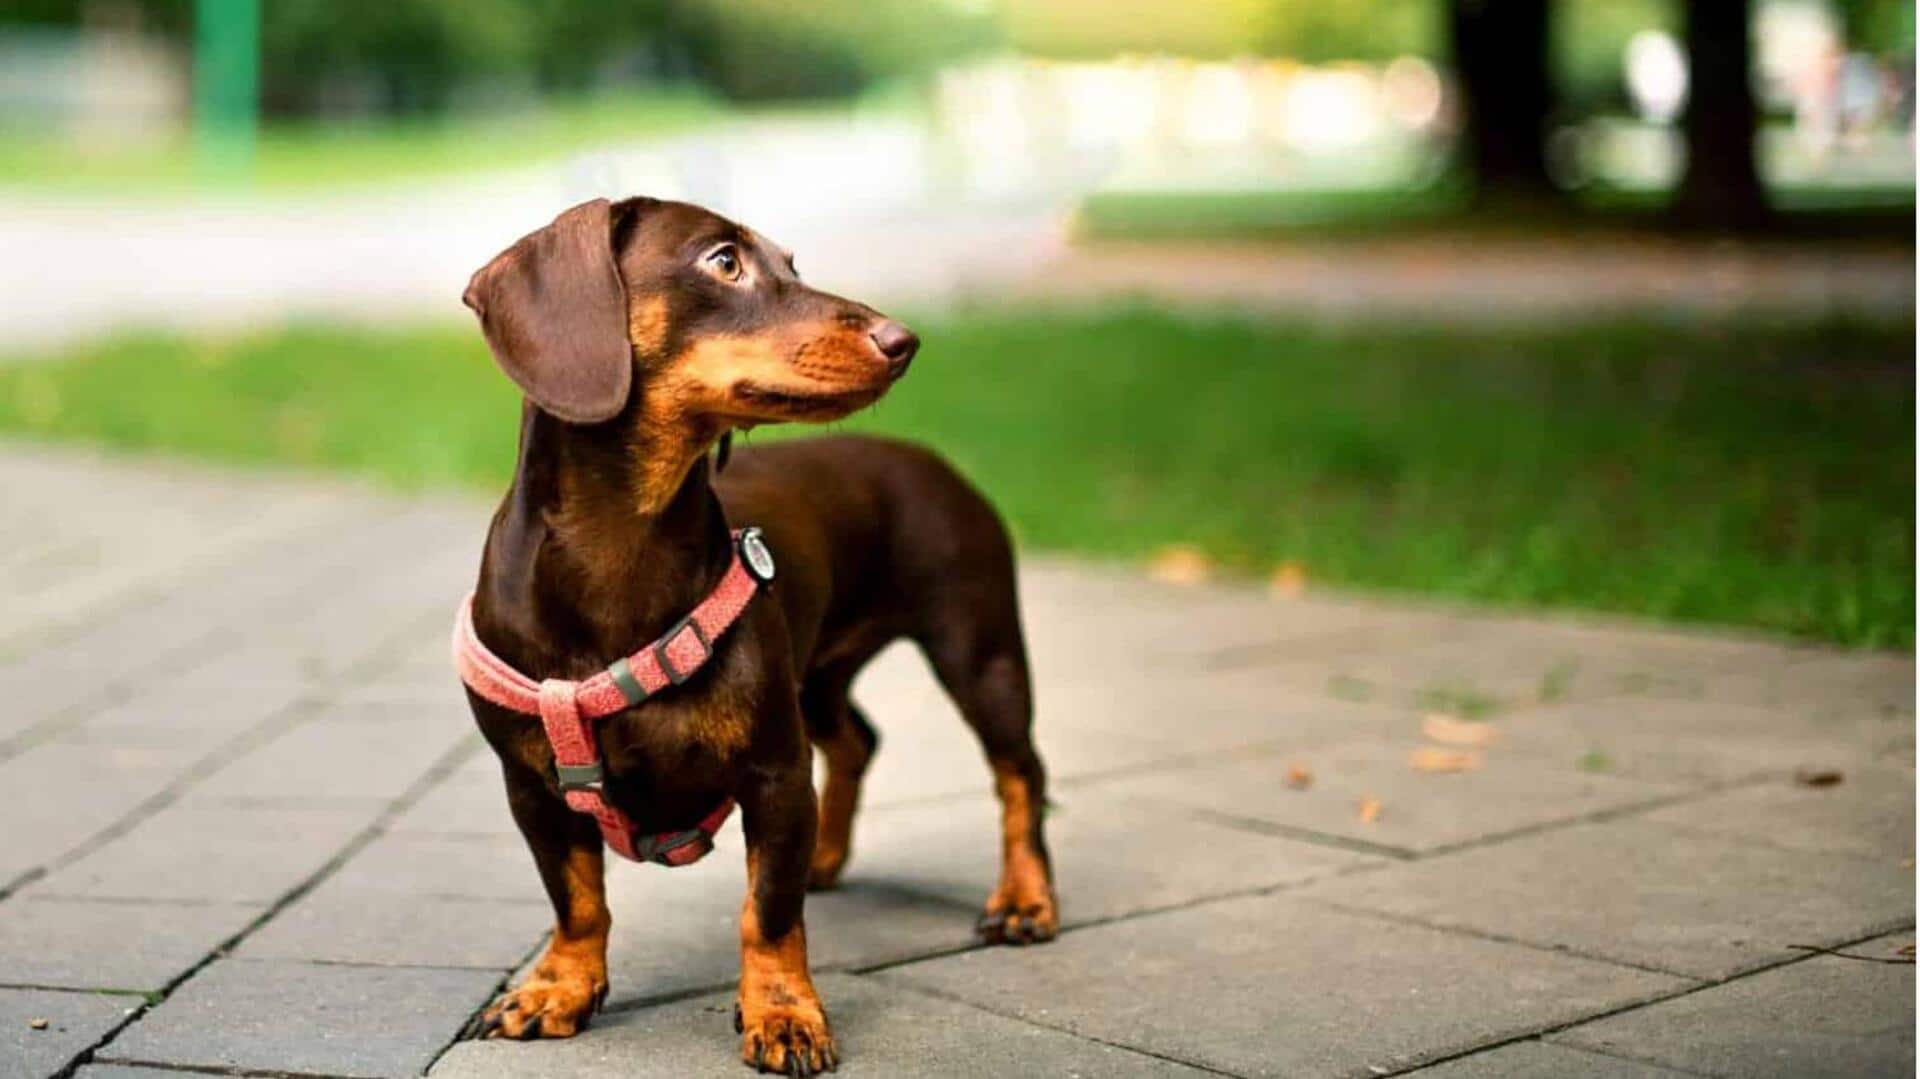 Dachshund dog's oral health: Take note of these tips